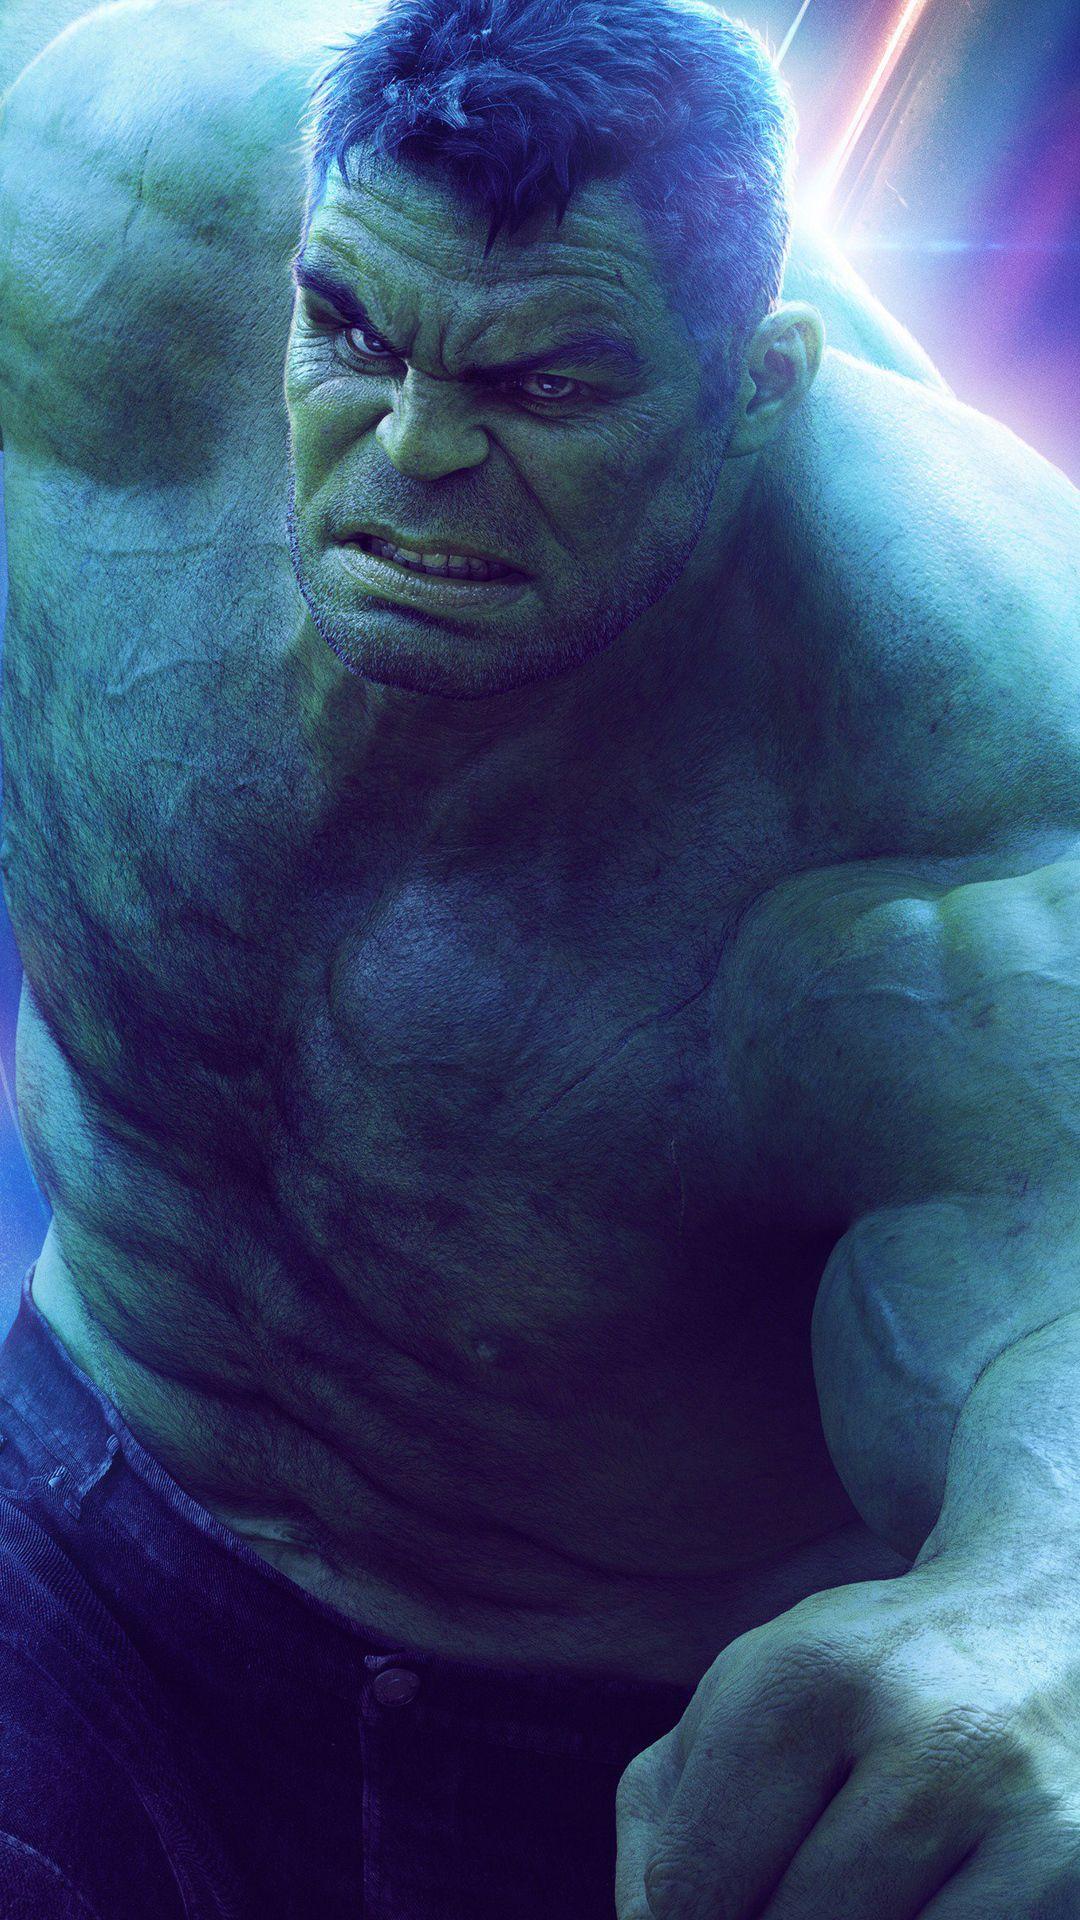 Hulk Infinity War 4k wallpaper for iPhone and Android